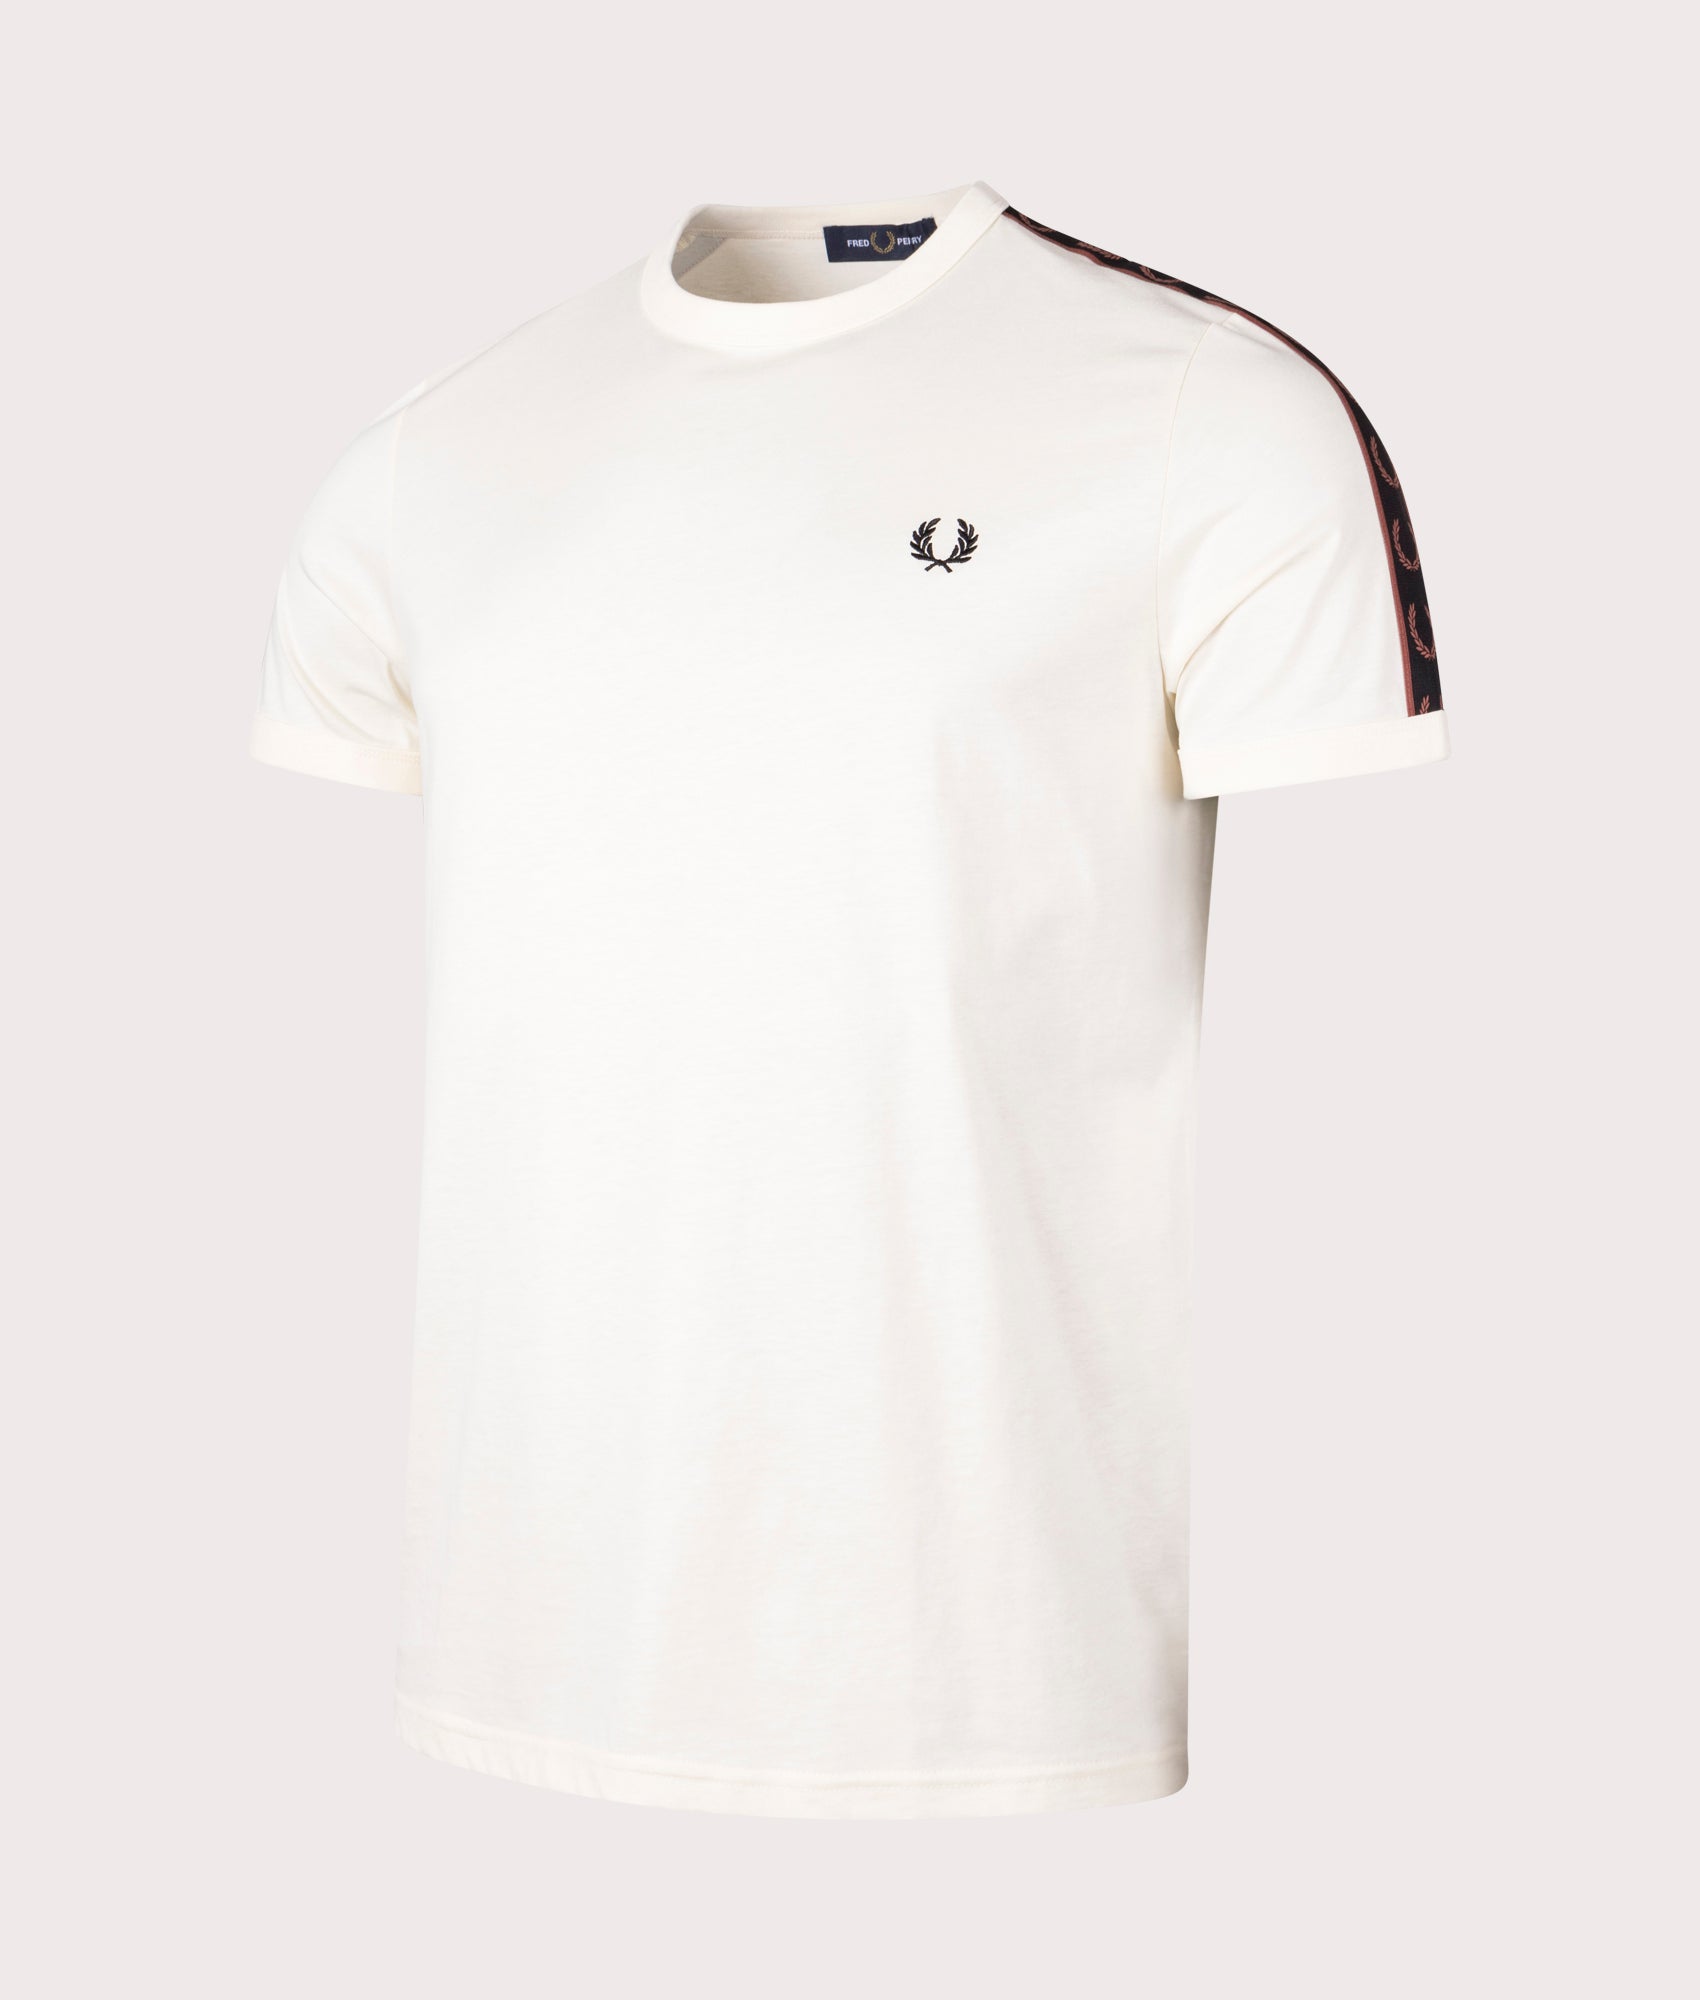 Fred Perry Mens Contrast Tape Ringer T-Shirt - Colour: U09 Ecru/Whisky Brwn - Size: Large